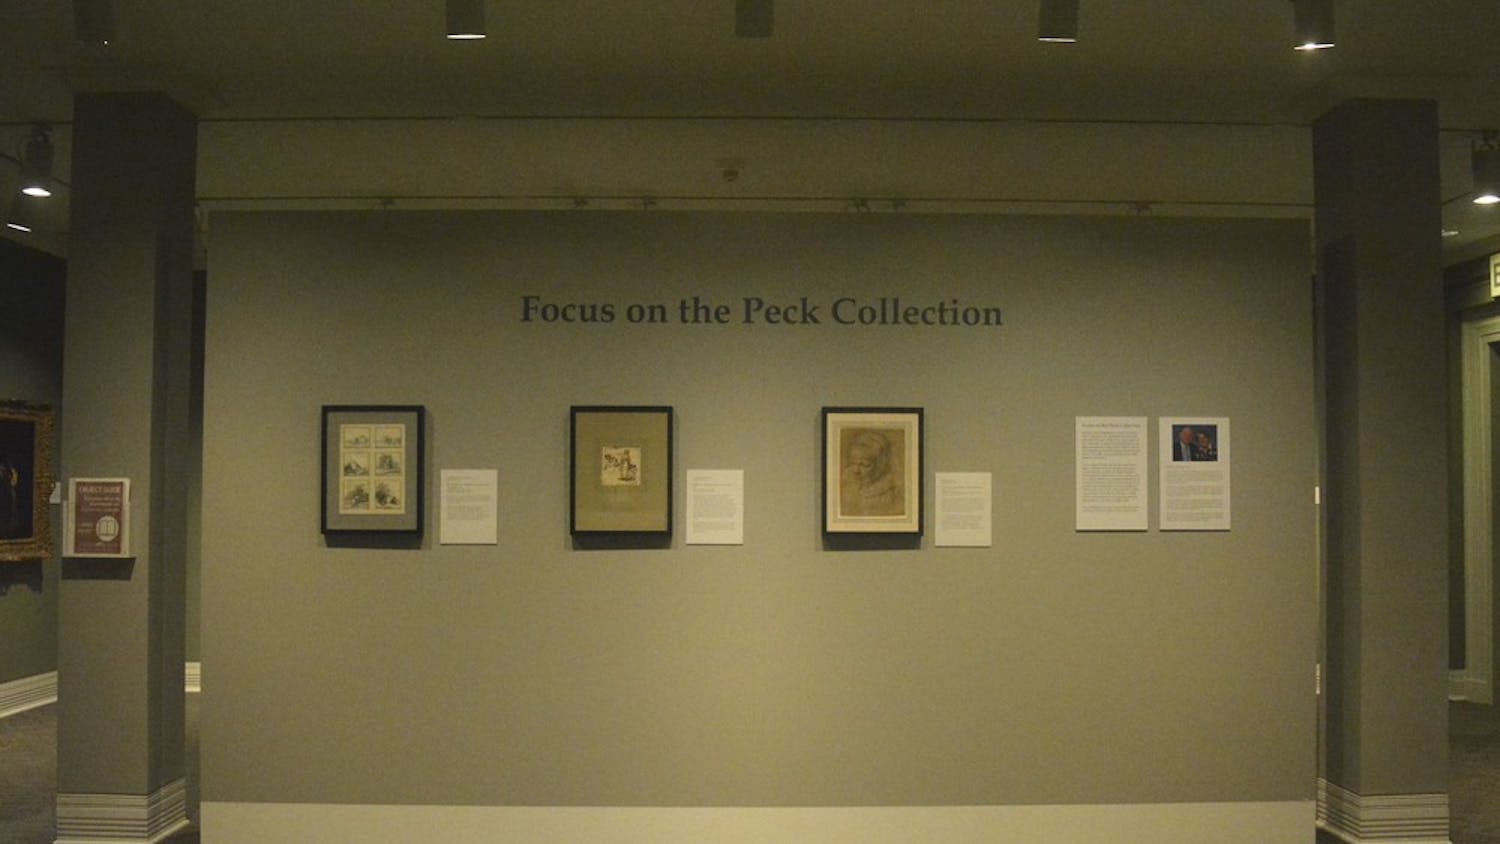 The first installment of the 134-piece "Focus on the Peck Collection Exhibit" donated by Sheldon and Leena Peck is currently displayed at the Ackland Art Museum.